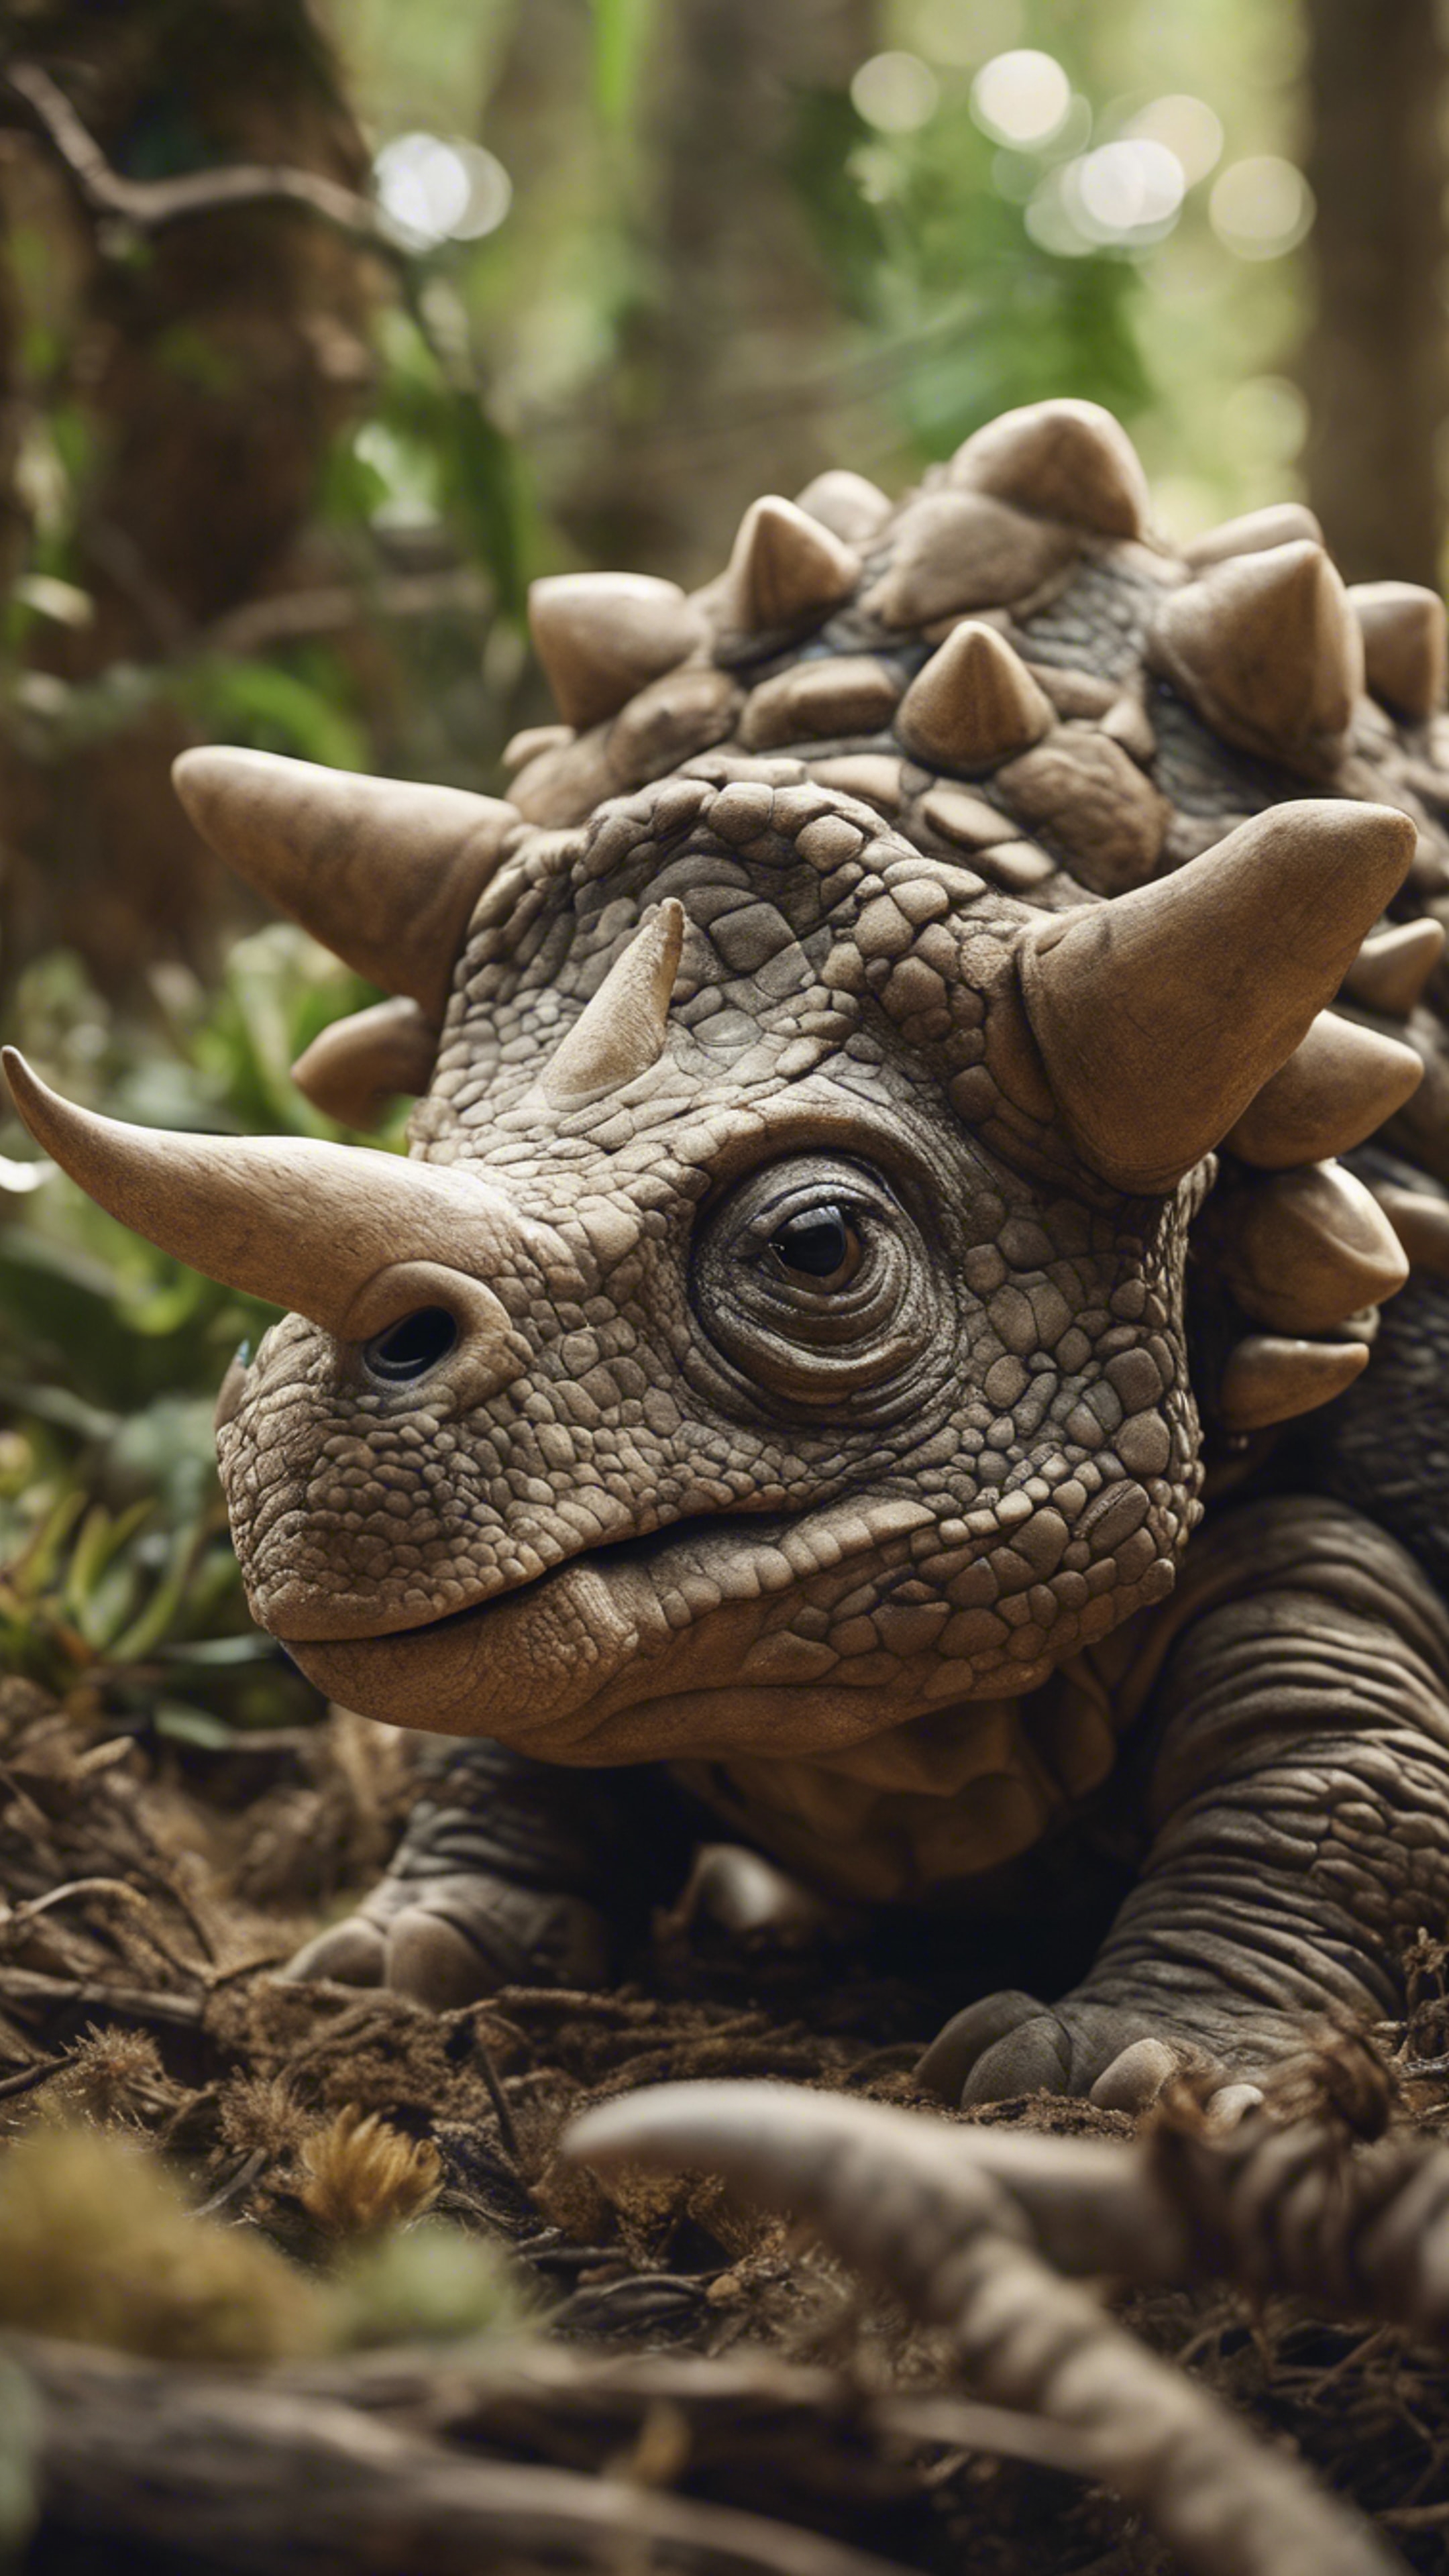 A nest full of baby Triceratops sleeping peacefully under the watchful eyes of their mother. Tapeta[9d947d640cf64dc3ba13]